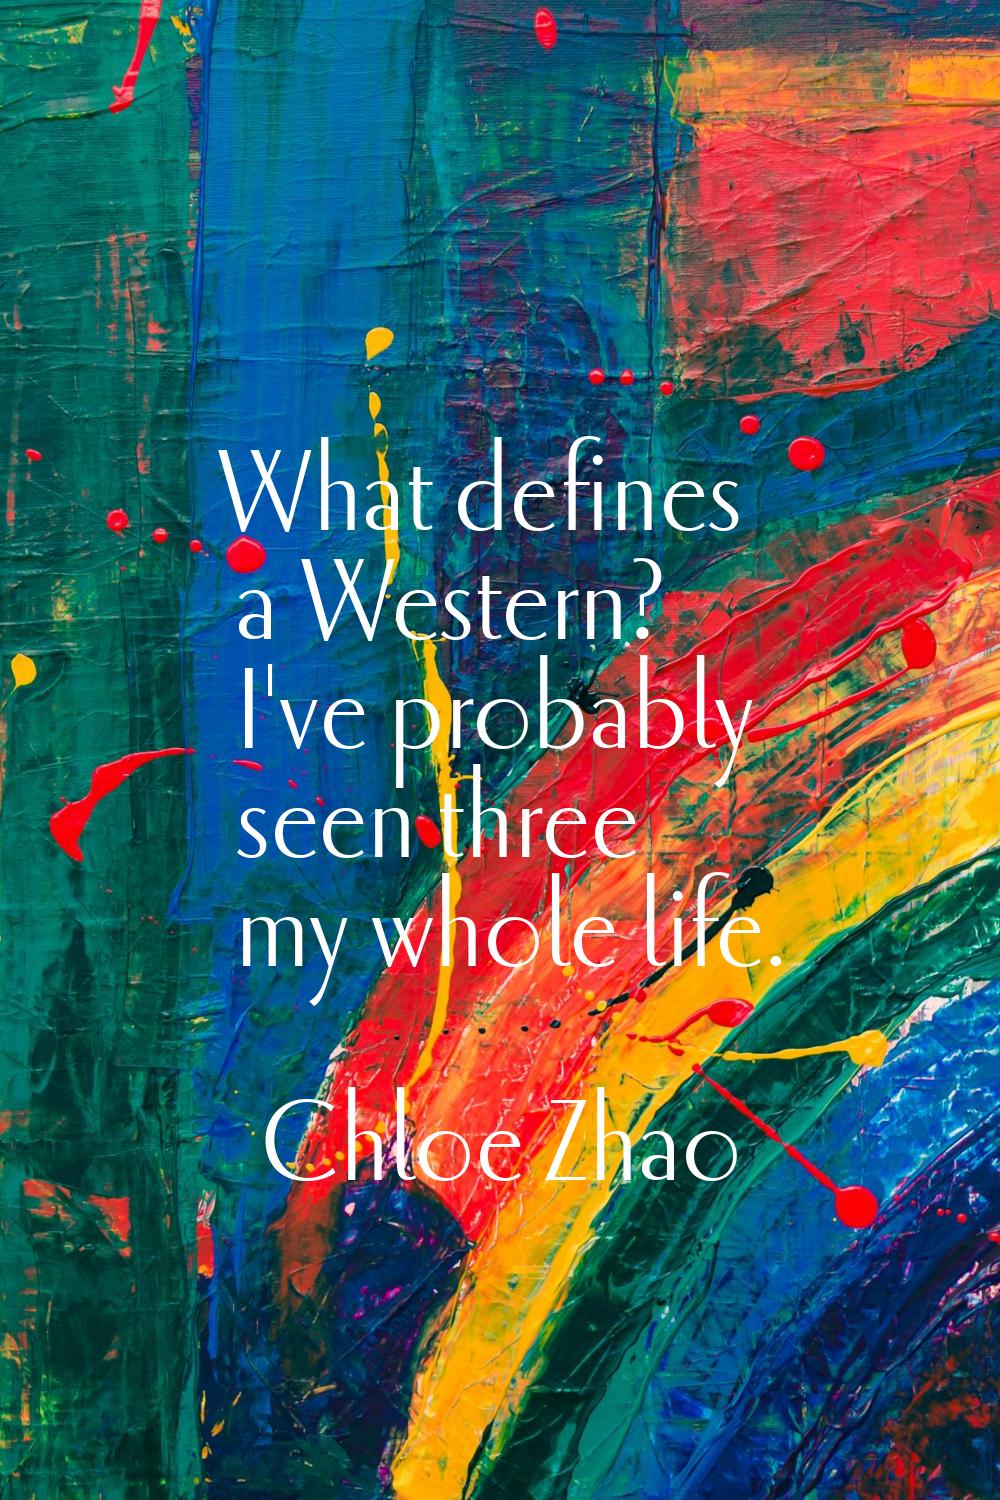 What defines a Western? I've probably seen three my whole life.